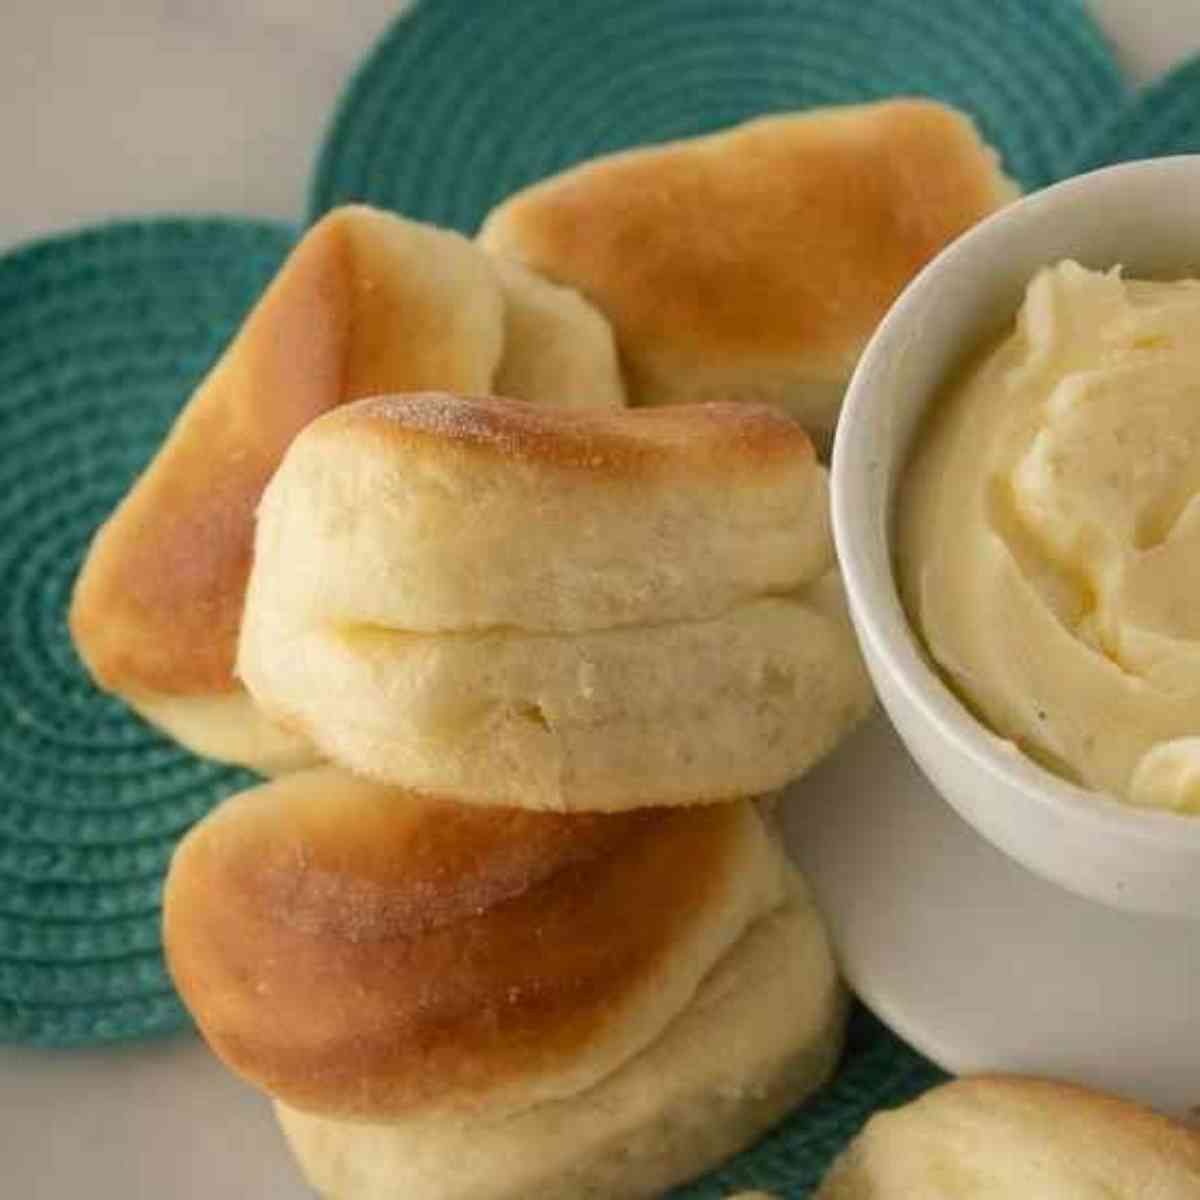 Parker House rolls by some butter.